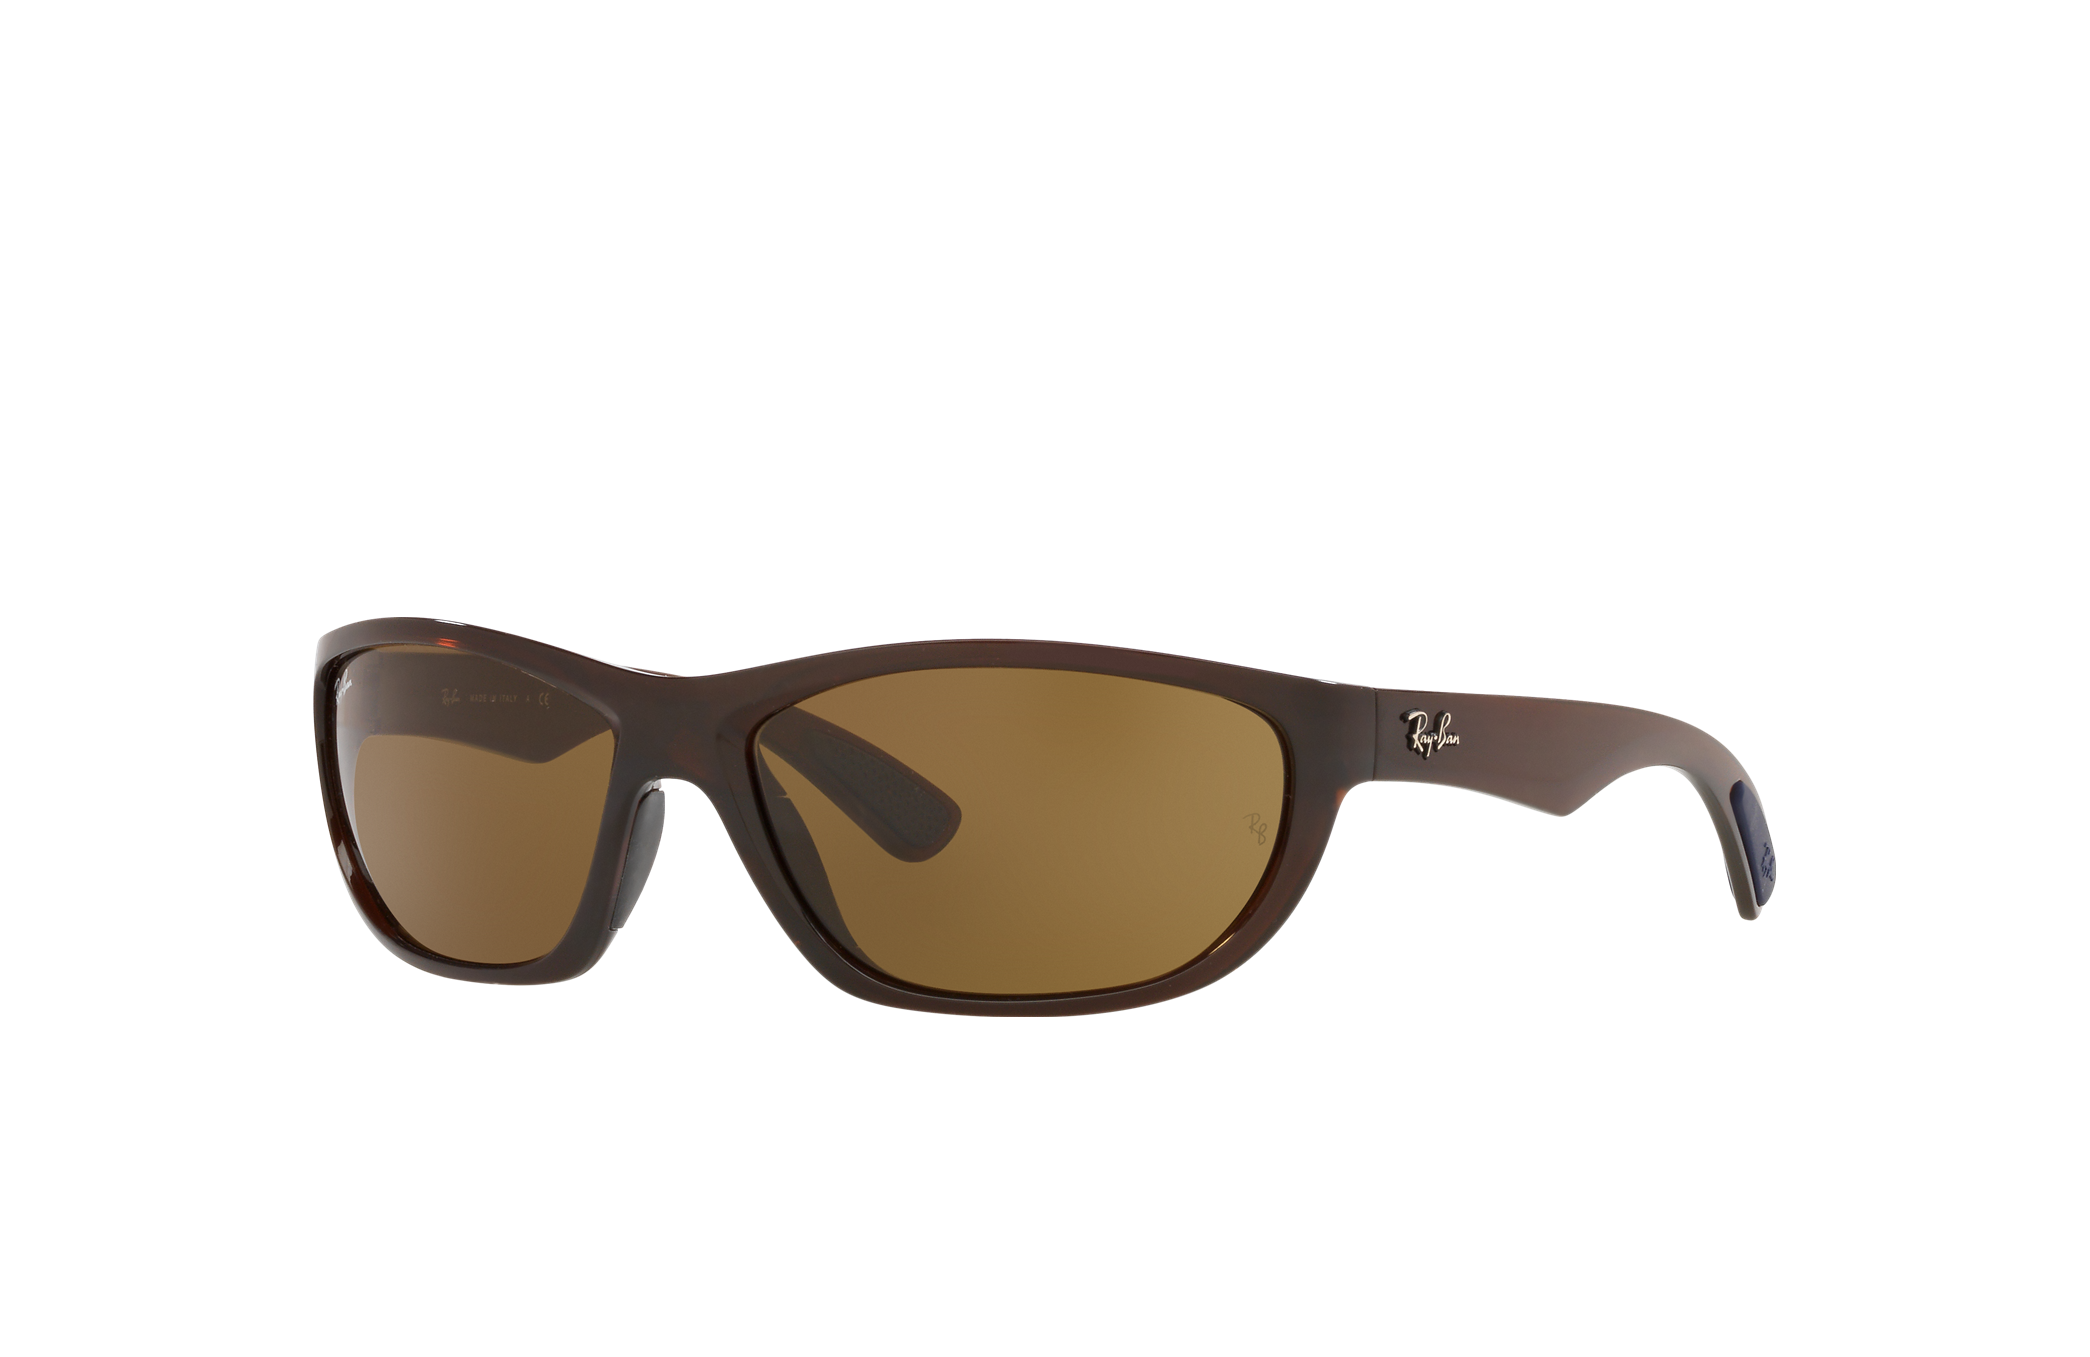 Ontwapening tempo mate Rb4188 Zonnebrillen in Bruin en Donkerbruin - RB4188 | Ray-Ban® NL